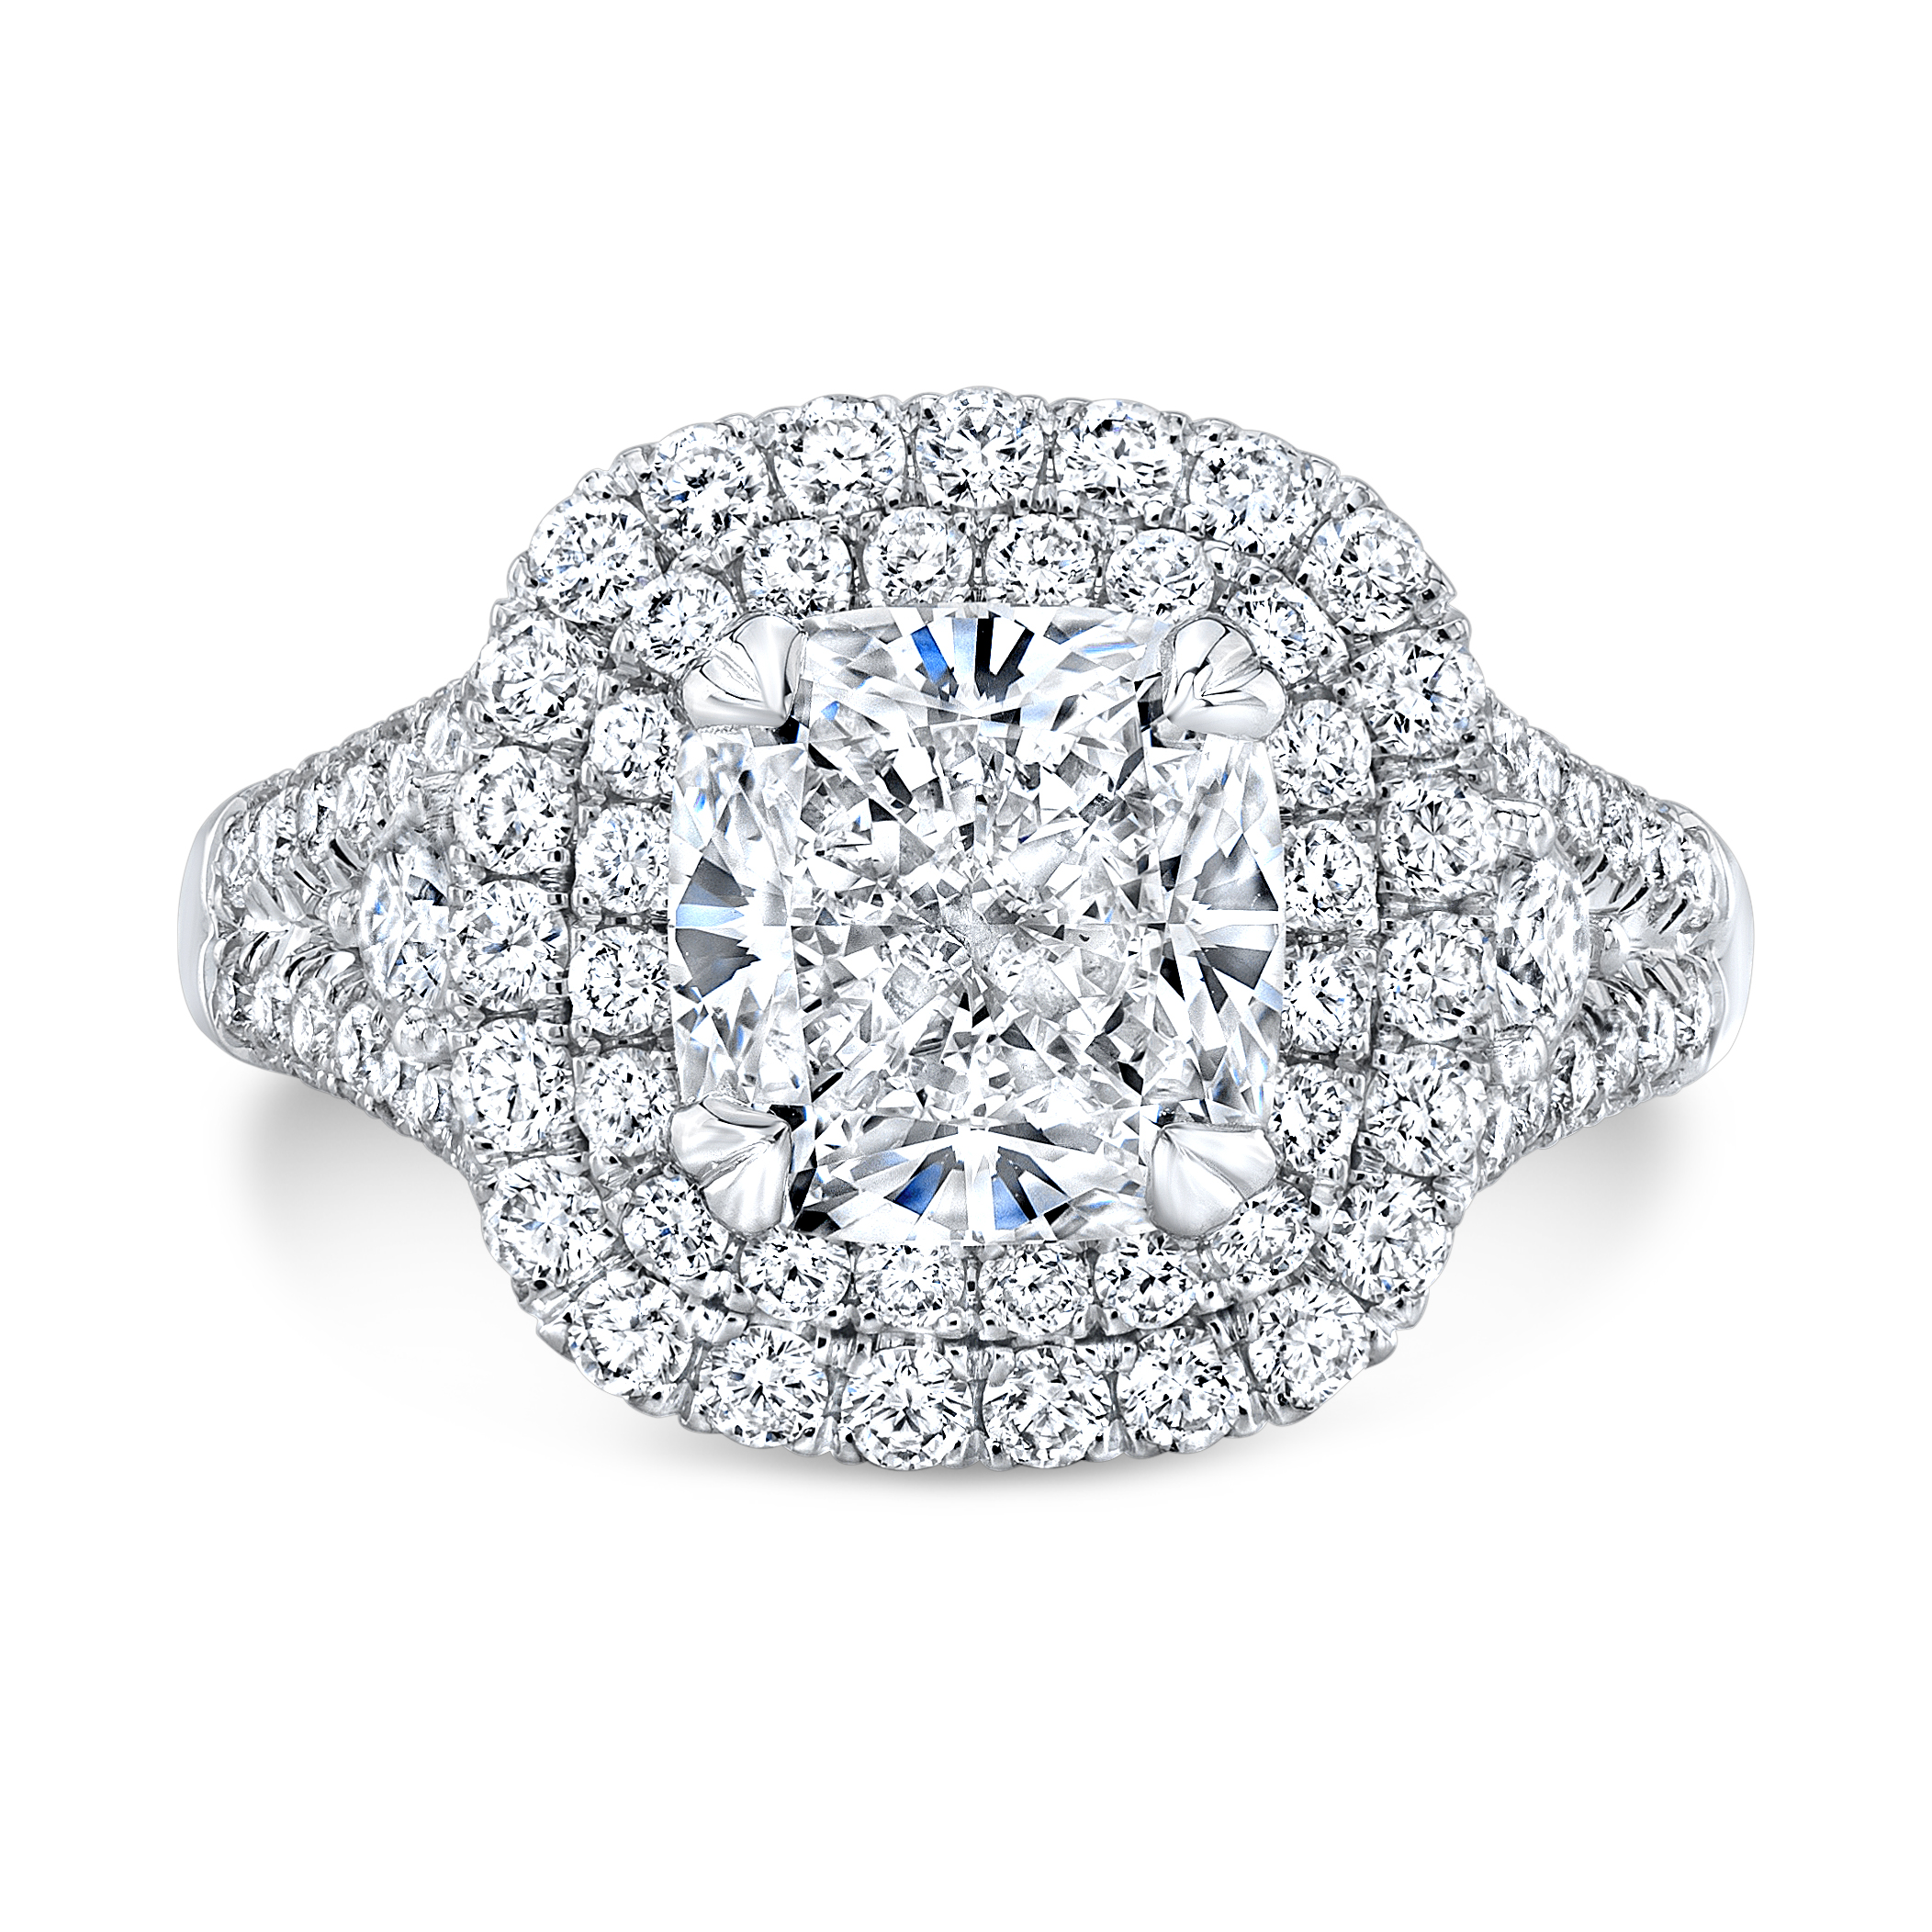 Double Halo Split Shank Micro Pave Diamond Engagement Ring in white gold 